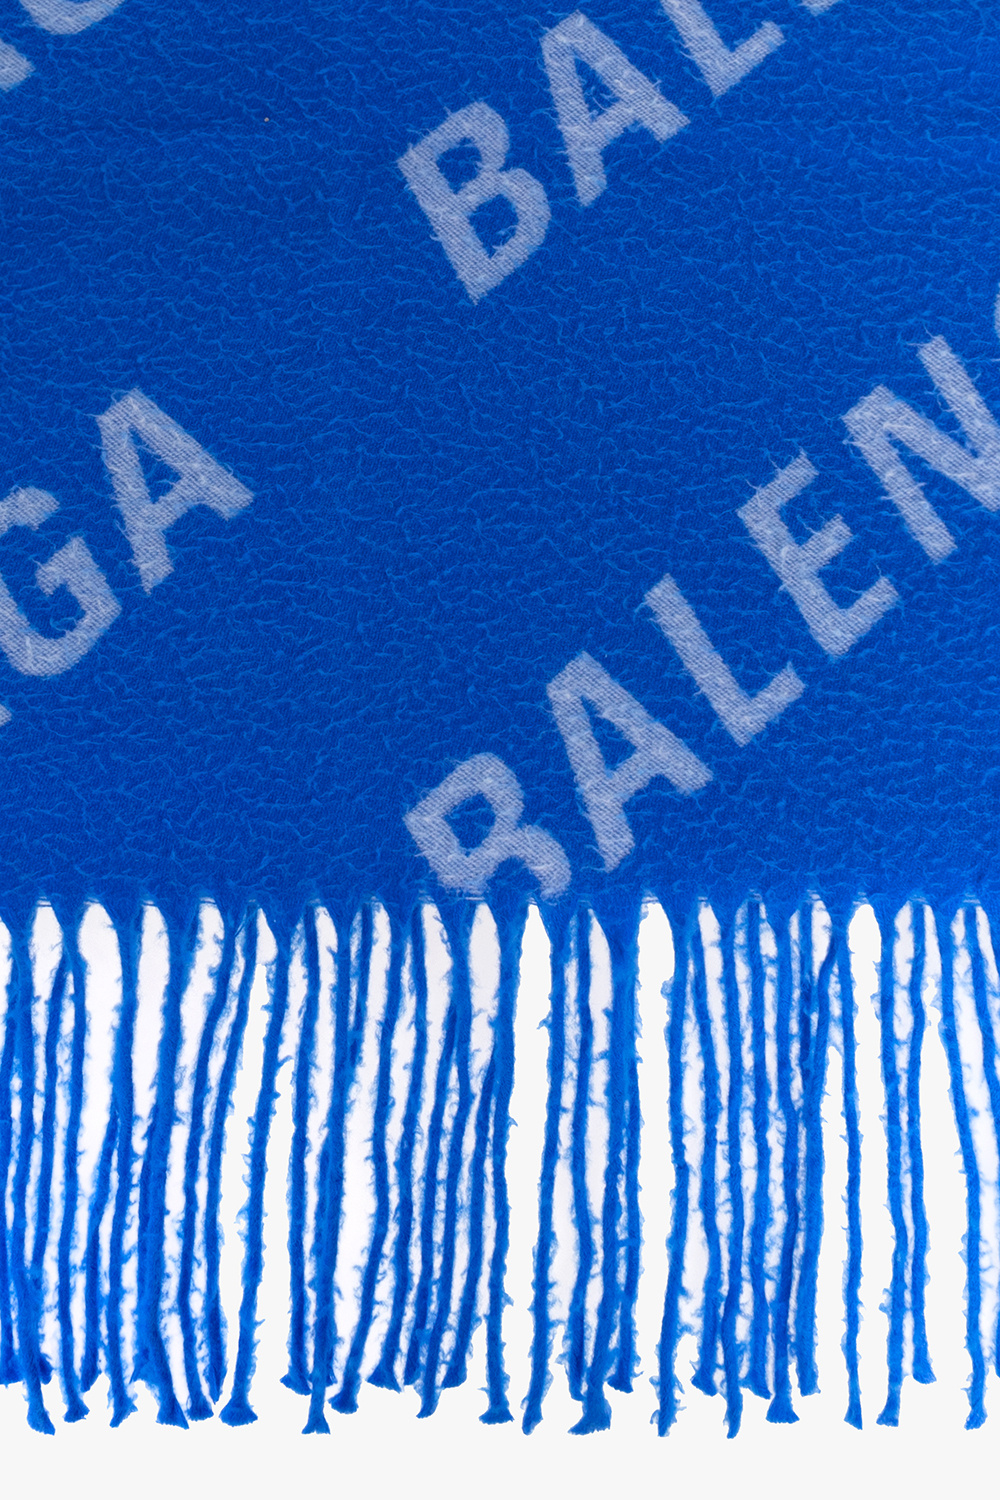 Balenciaga PERFECT GIFTS FOR IMPERFECT MOMS